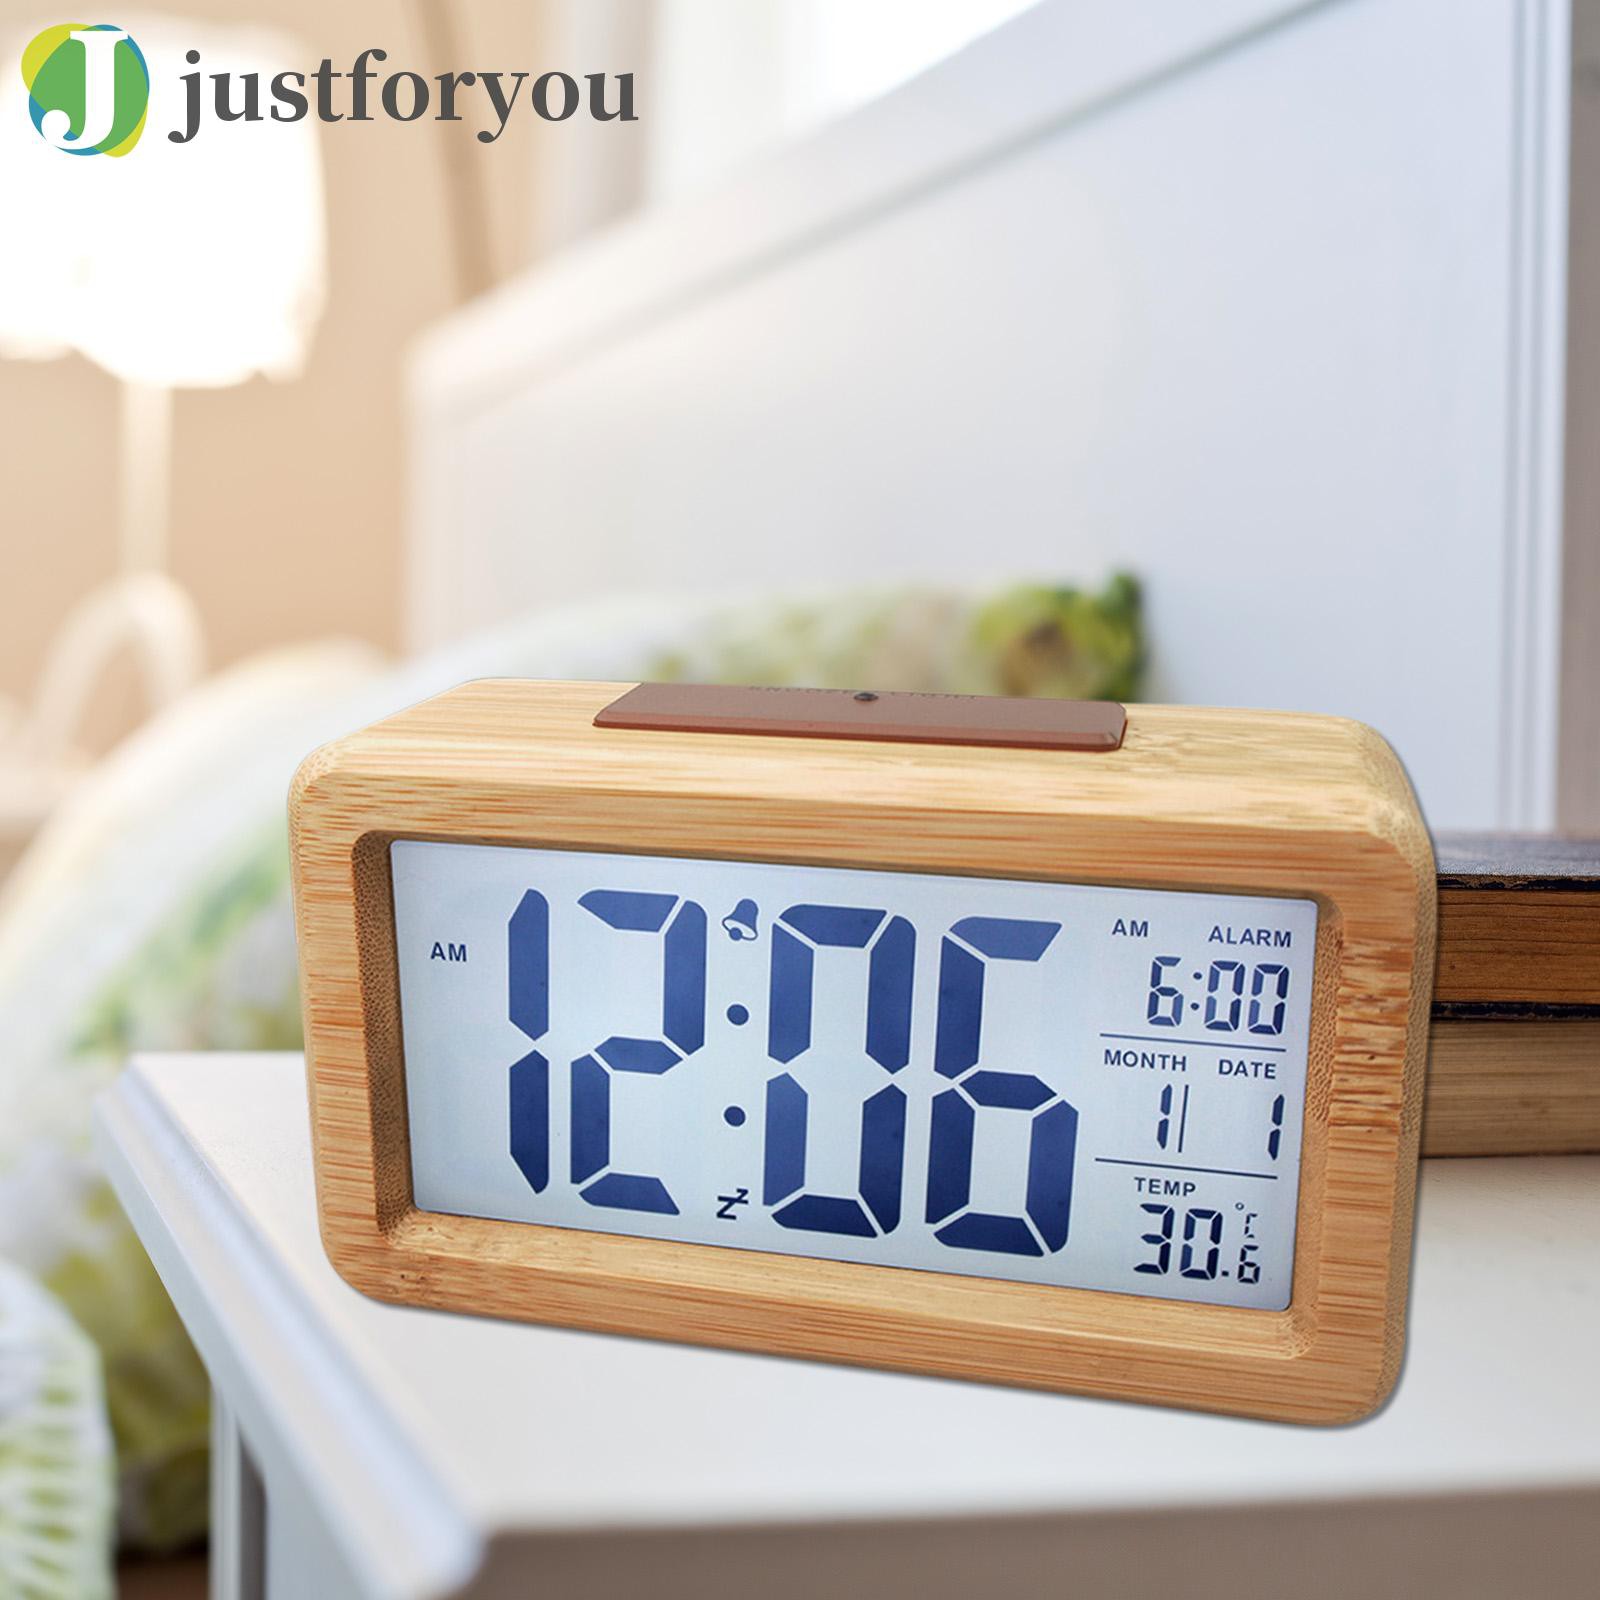 Justforyou Digital Alarm Clock, Wooden Time Display Battery Operated Electronic Clocks